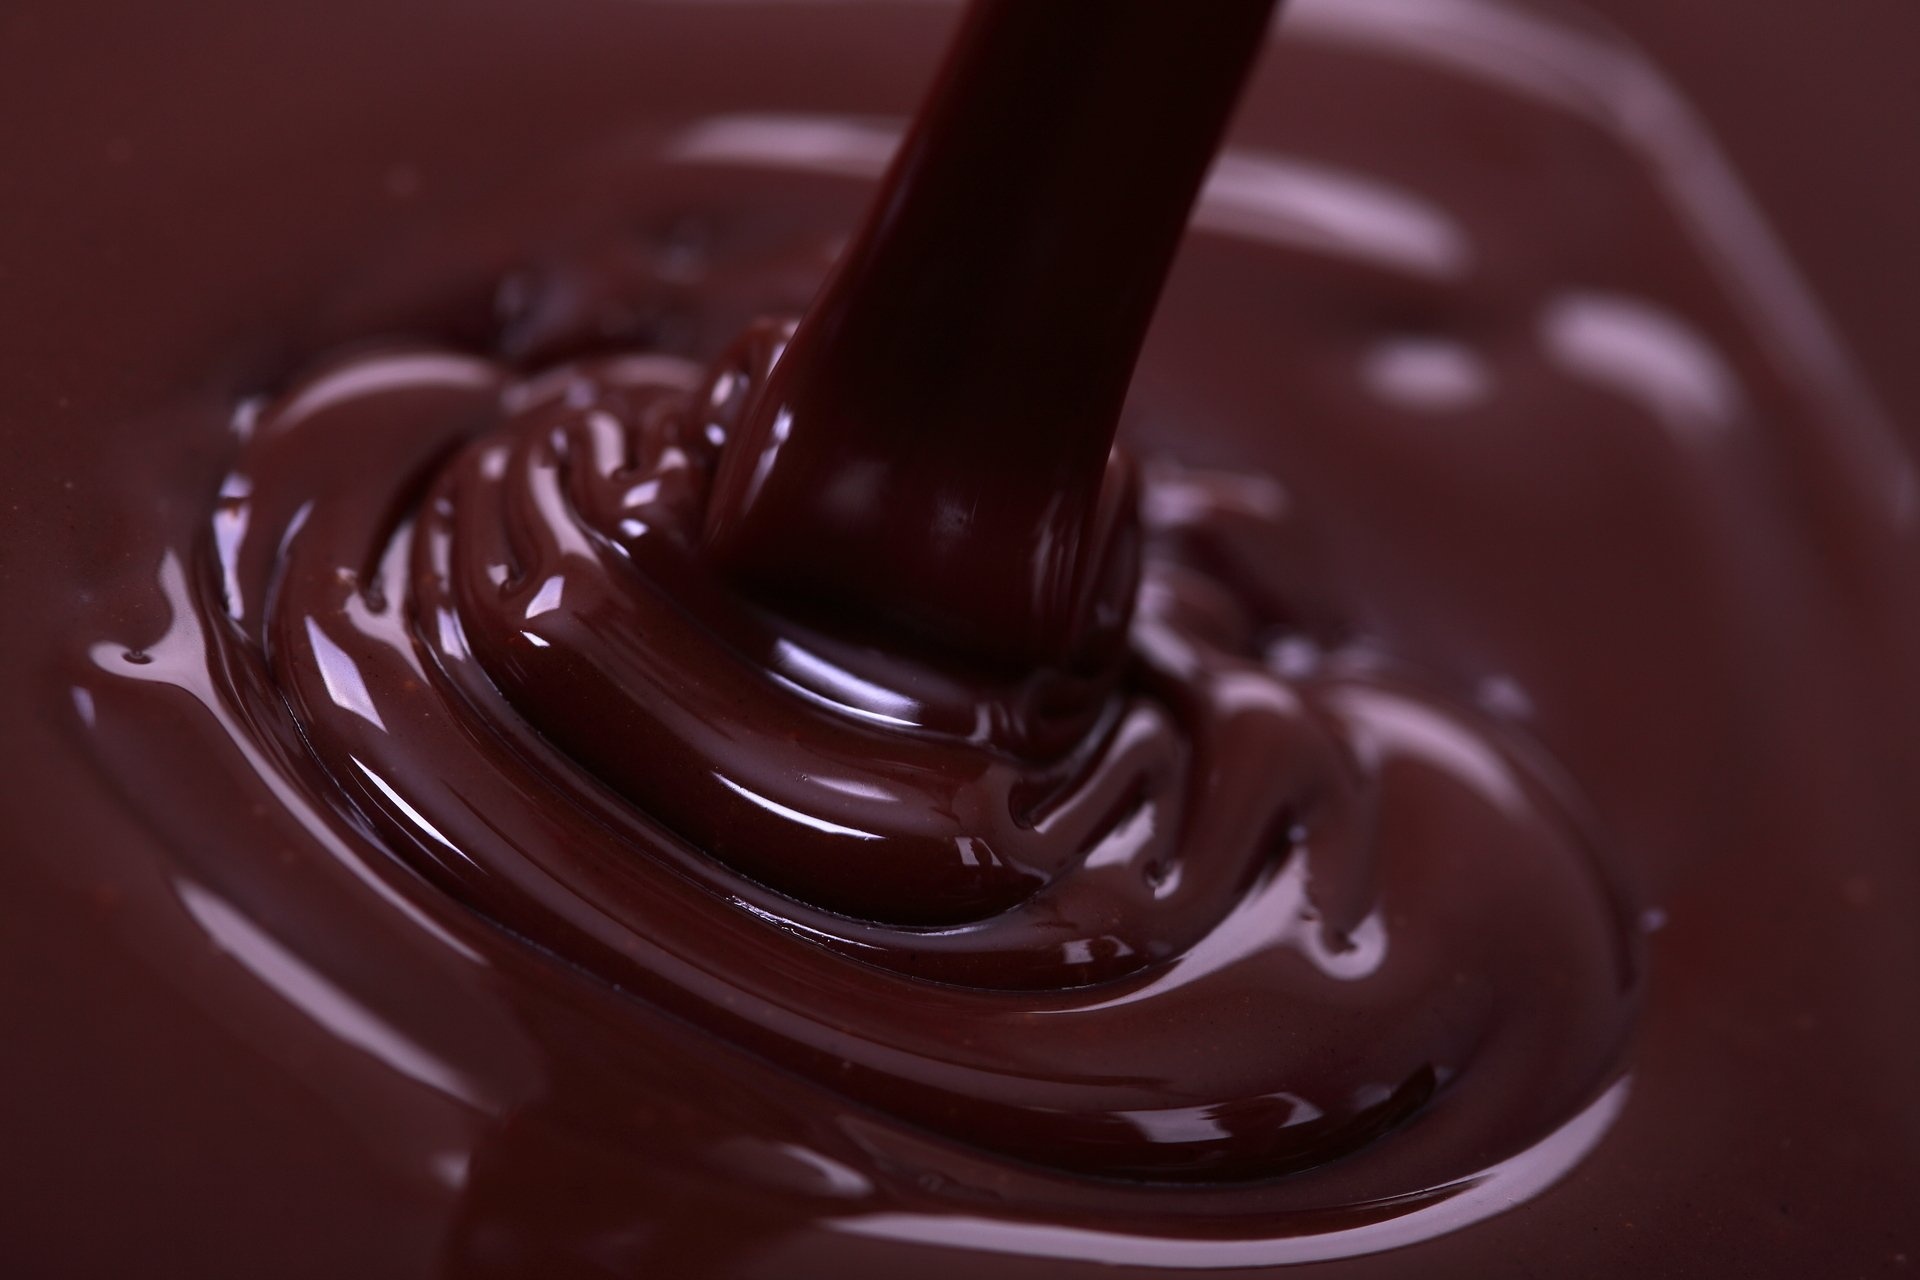 Chocolate: Contains 50-90% cocoa solids, cocoa butter, and sugar. 1920x1280 HD Background.